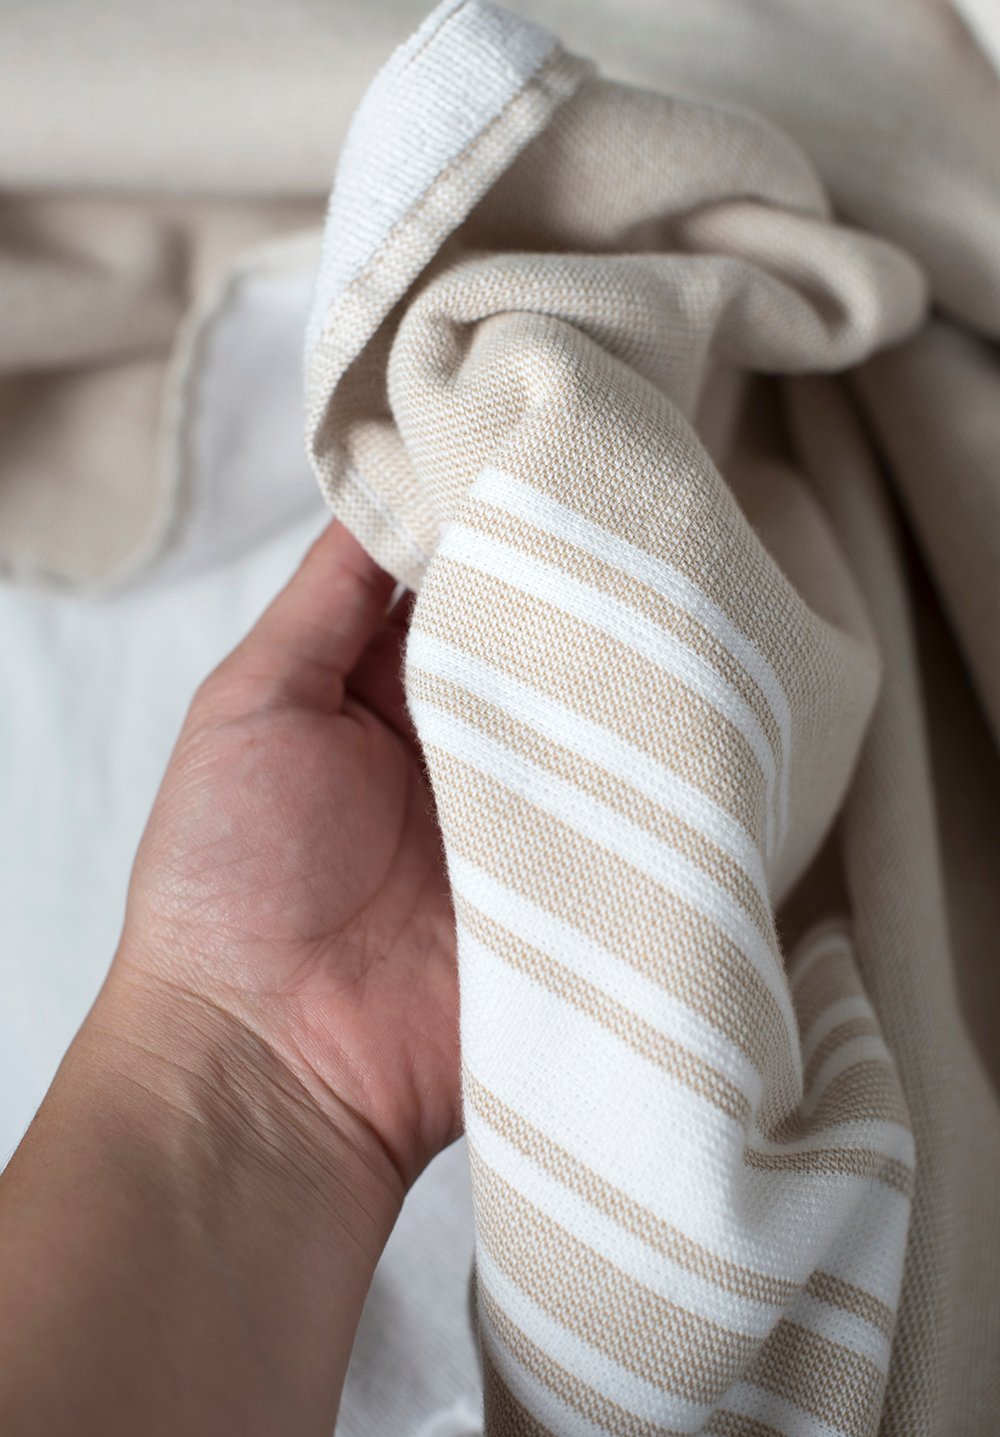 How to Care for Turkish Towels on a Daily Basis